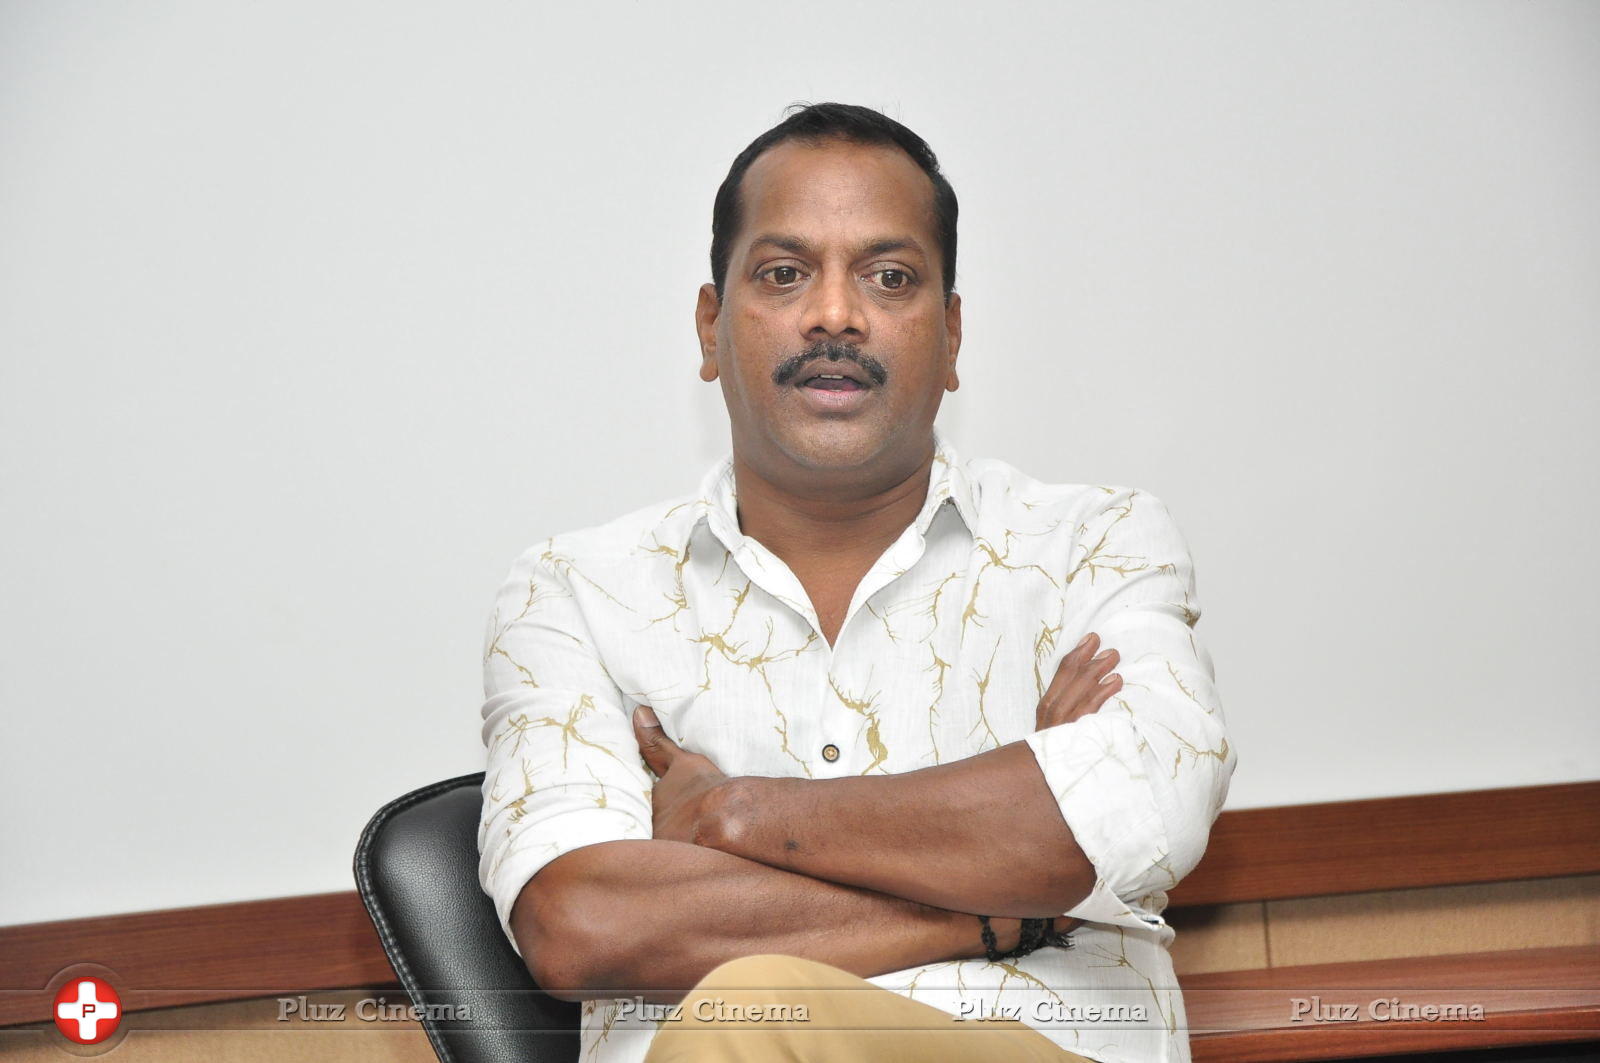 Director A S Ravi Kumar Chowdary Interview Stills | Picture 1183853